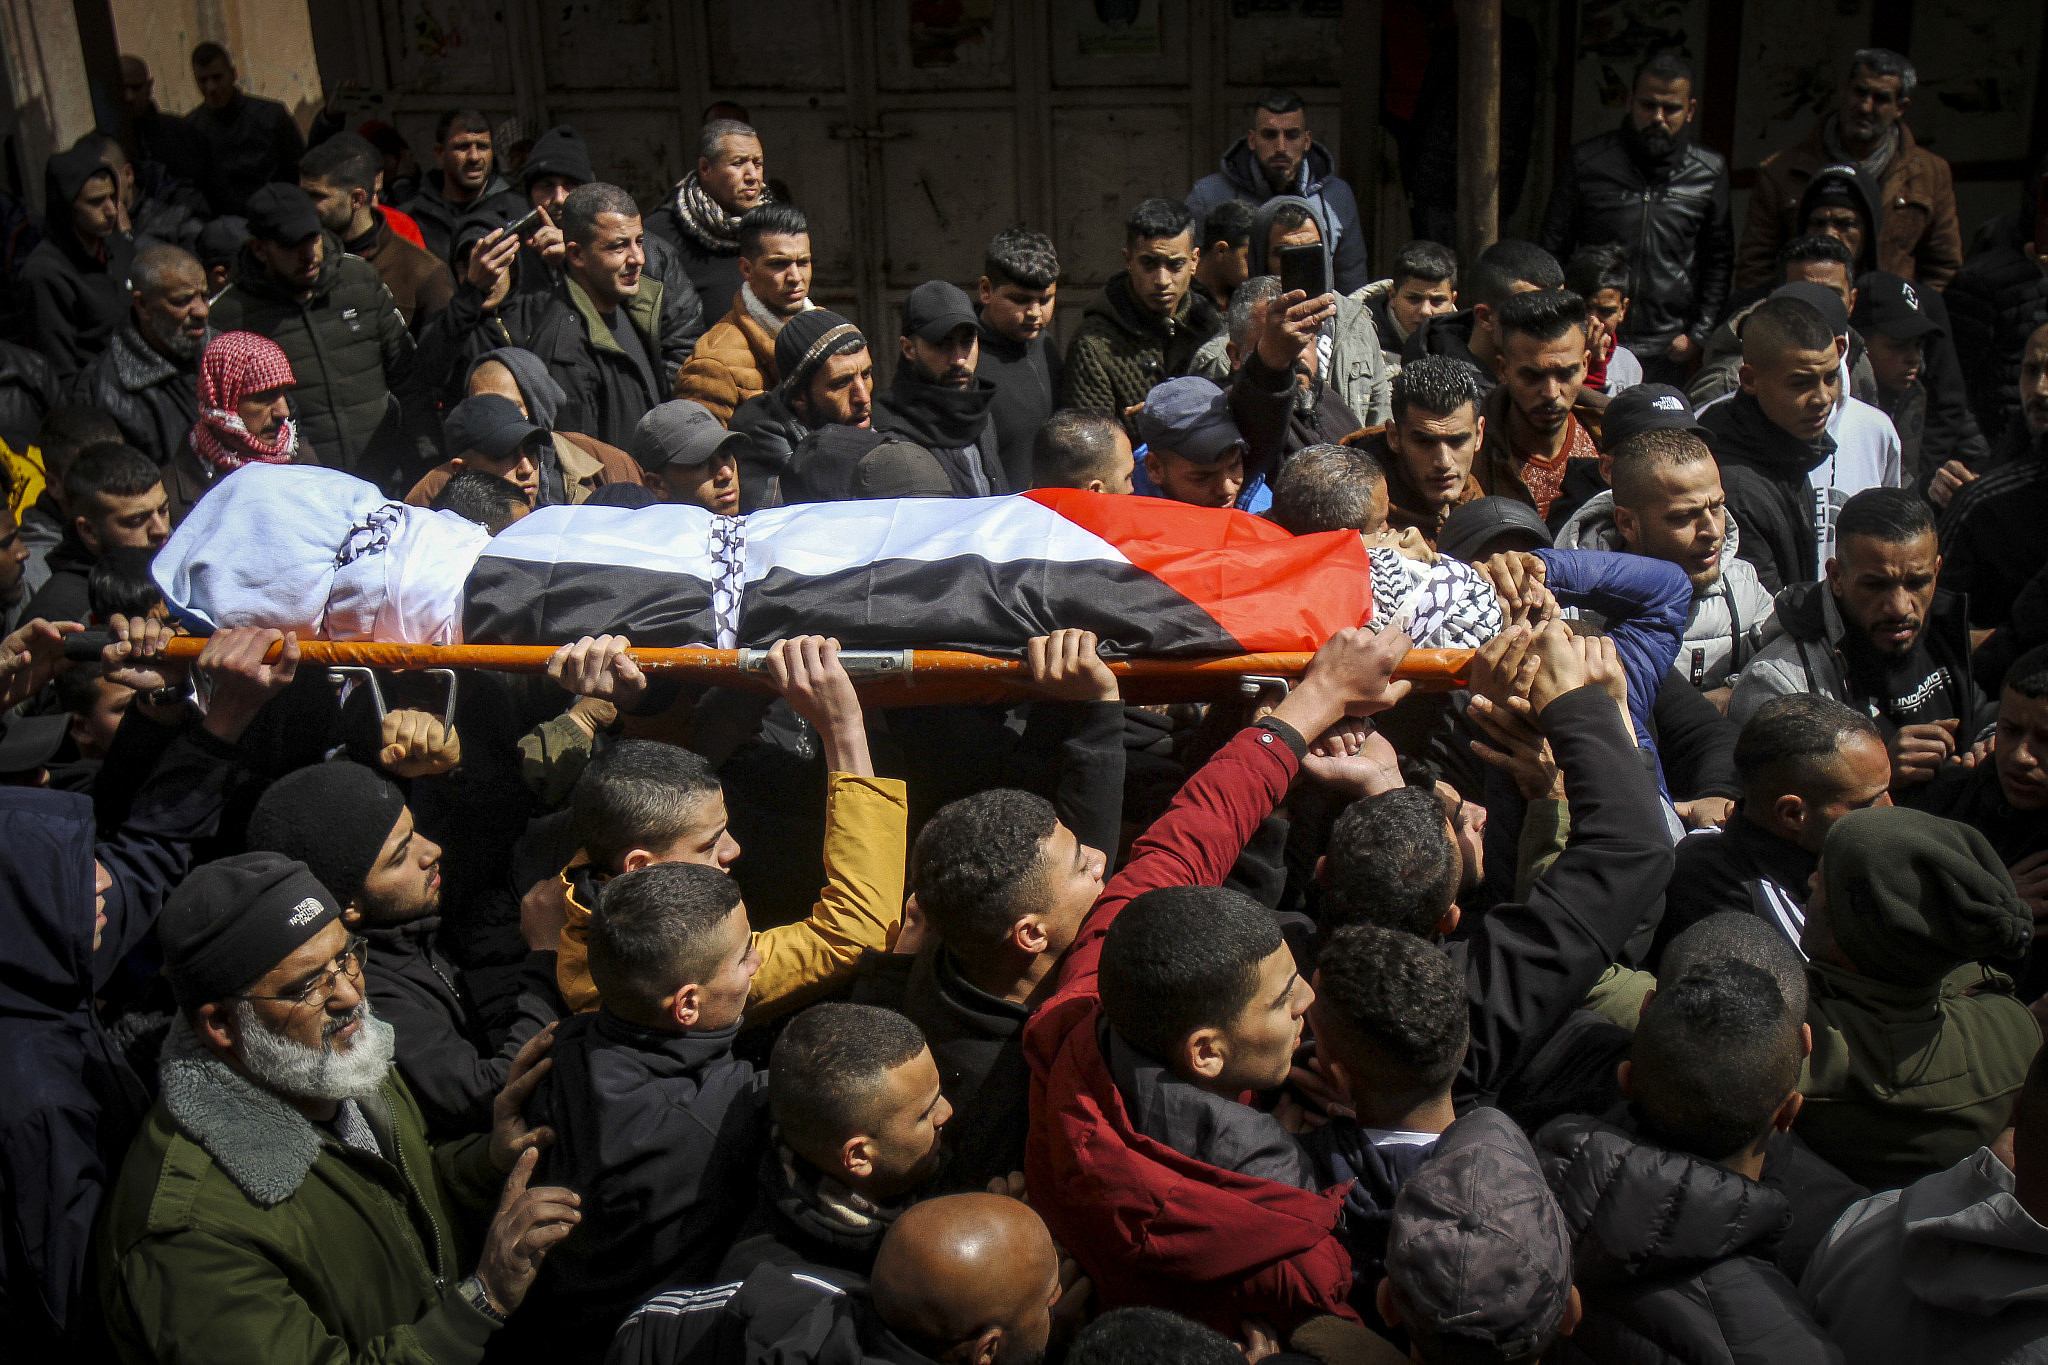 Mourners carry the body of 16-year-old Nader Rayan during his funeral at Balata refugee camp in the West Bank city of Nablus, March 15, 2022. (Nasser Ishtayeh/Flash90)